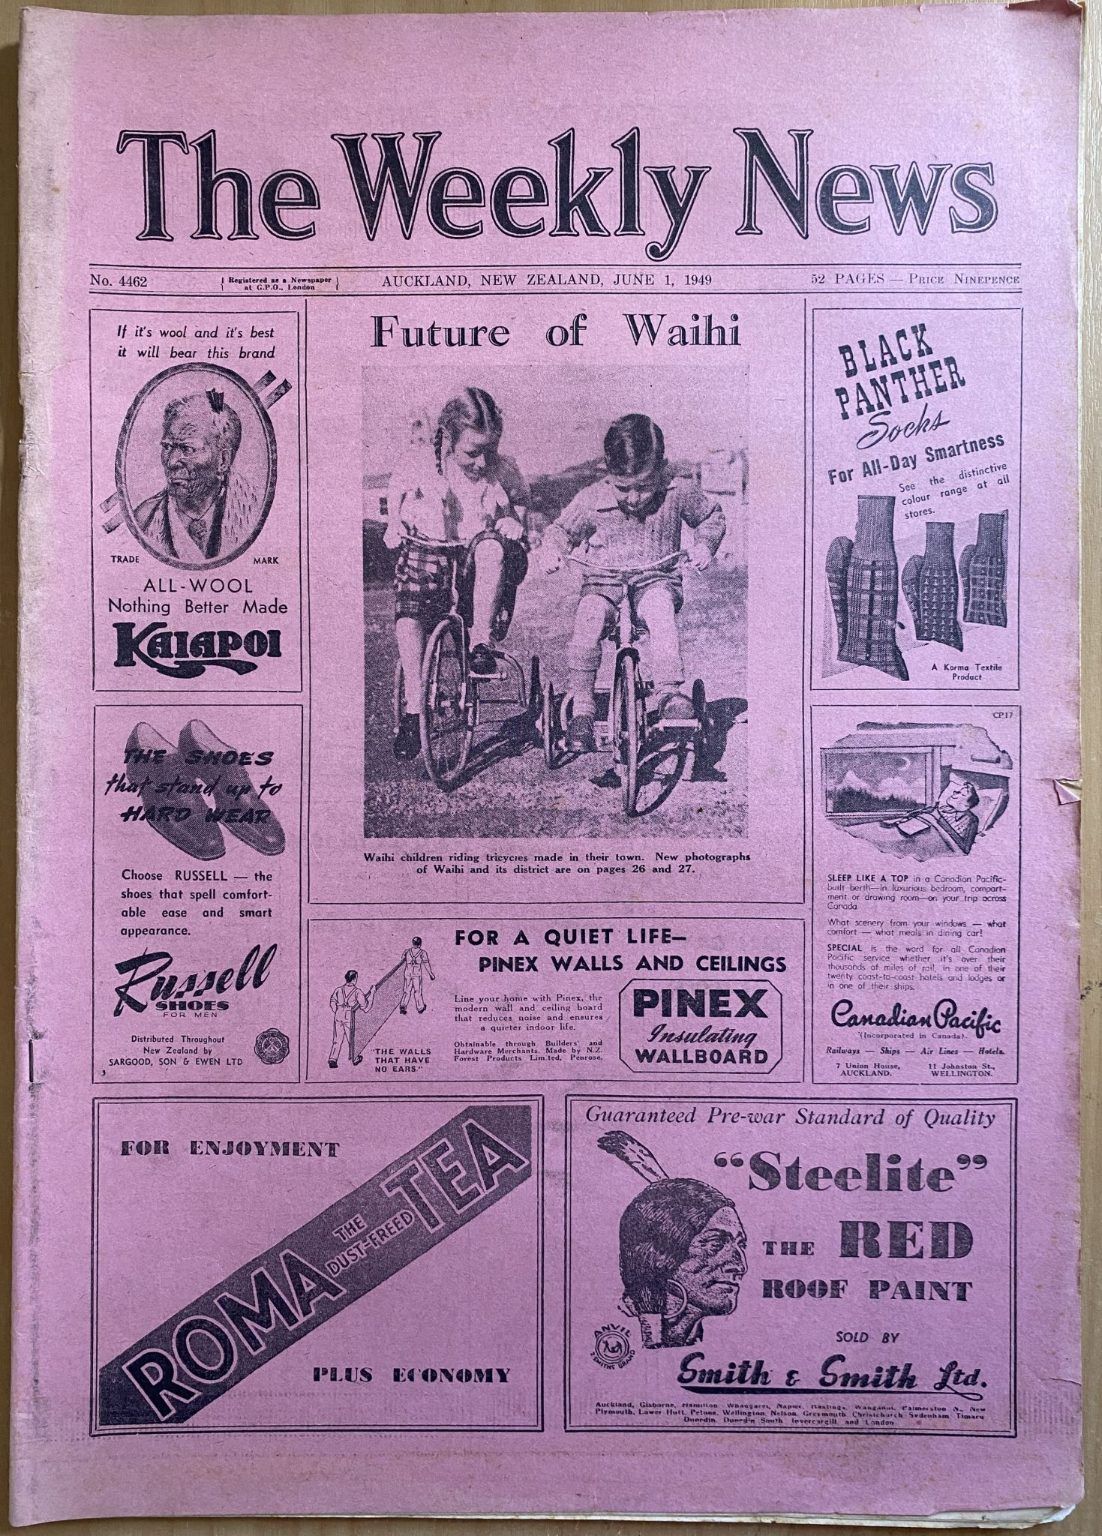 OLD NEWSPAPER: The Weekly News, No. 4462, 1 June 1949